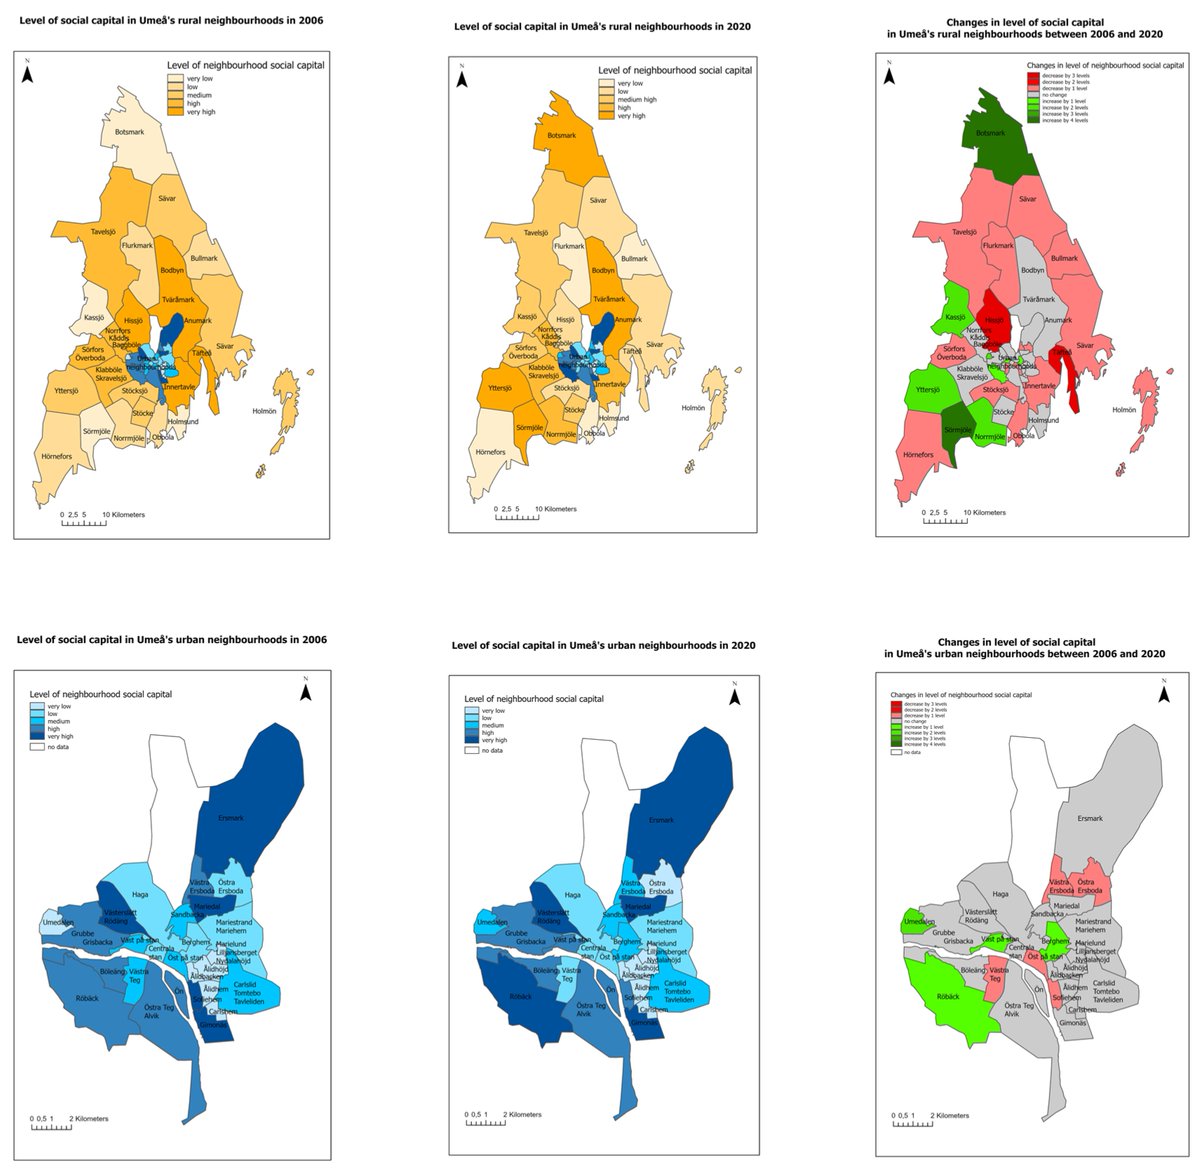 #SUSEditorialChoice Social Capital and Sustainable Social Development—How Are Changes in Neighbourhood Social Capital Associated with Neighbourhood Sociodemographic and Socioeconomic Characteristics? by Malin Eriksson, et al. mdpi.com/2071-1050/13/2… #socialcapital